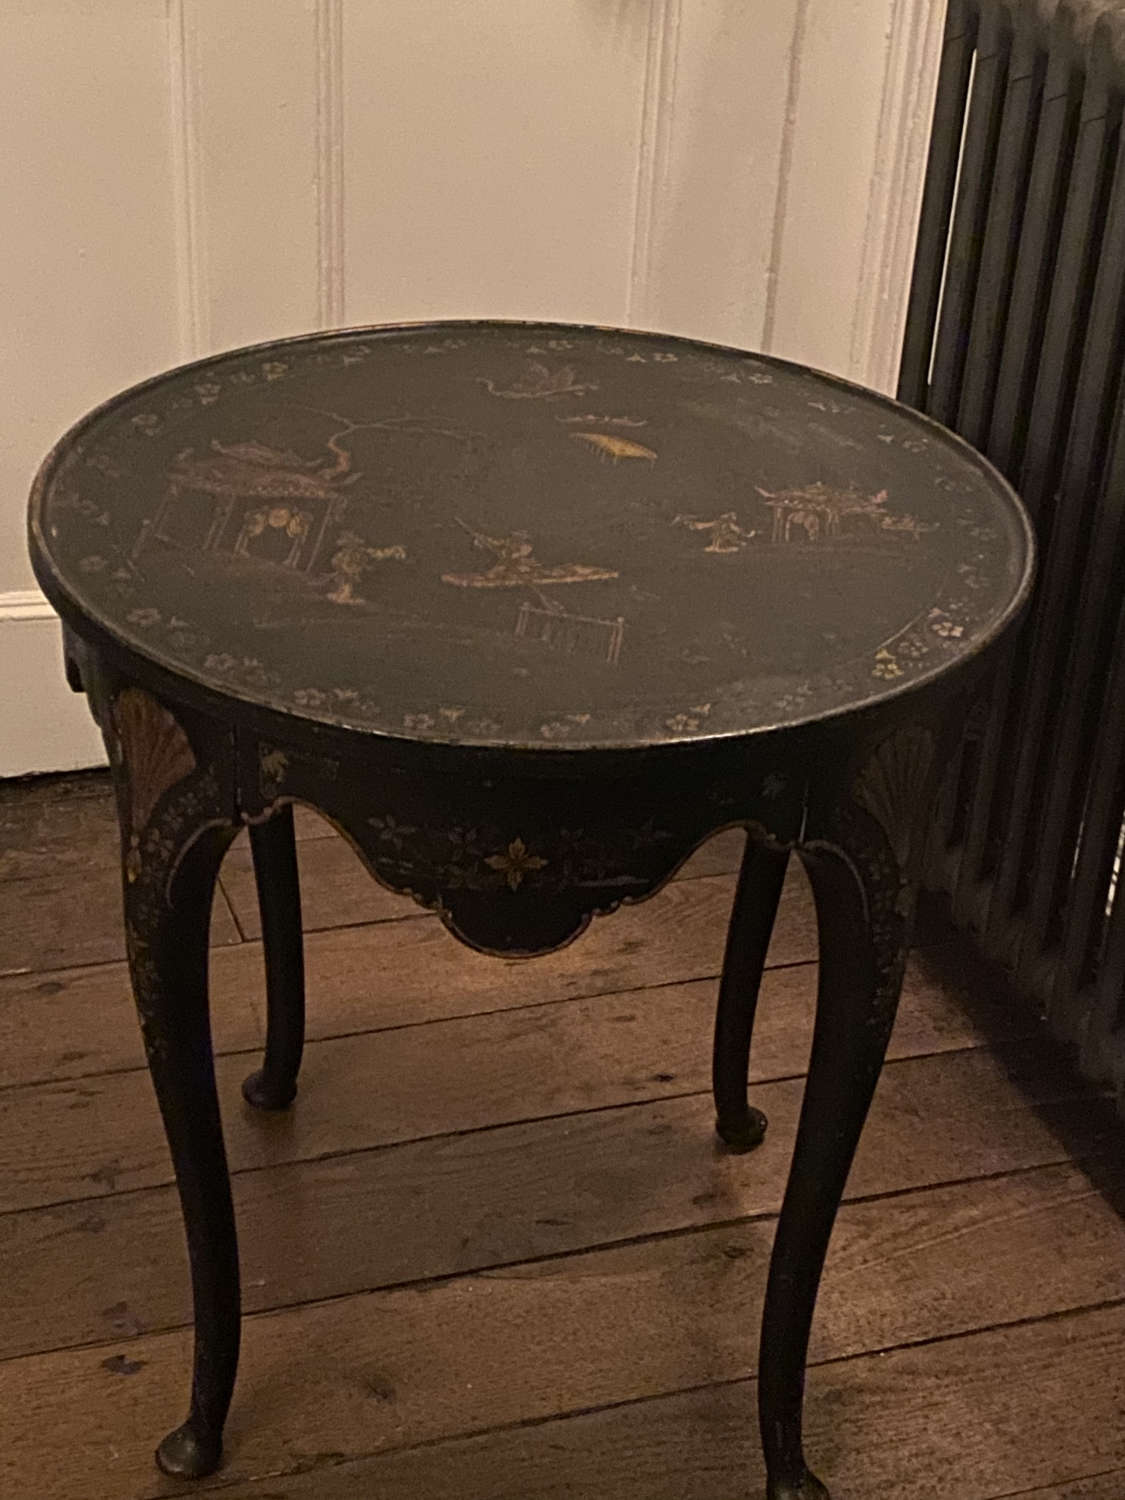 A Japanned Black lacquer chinoiserie low side table